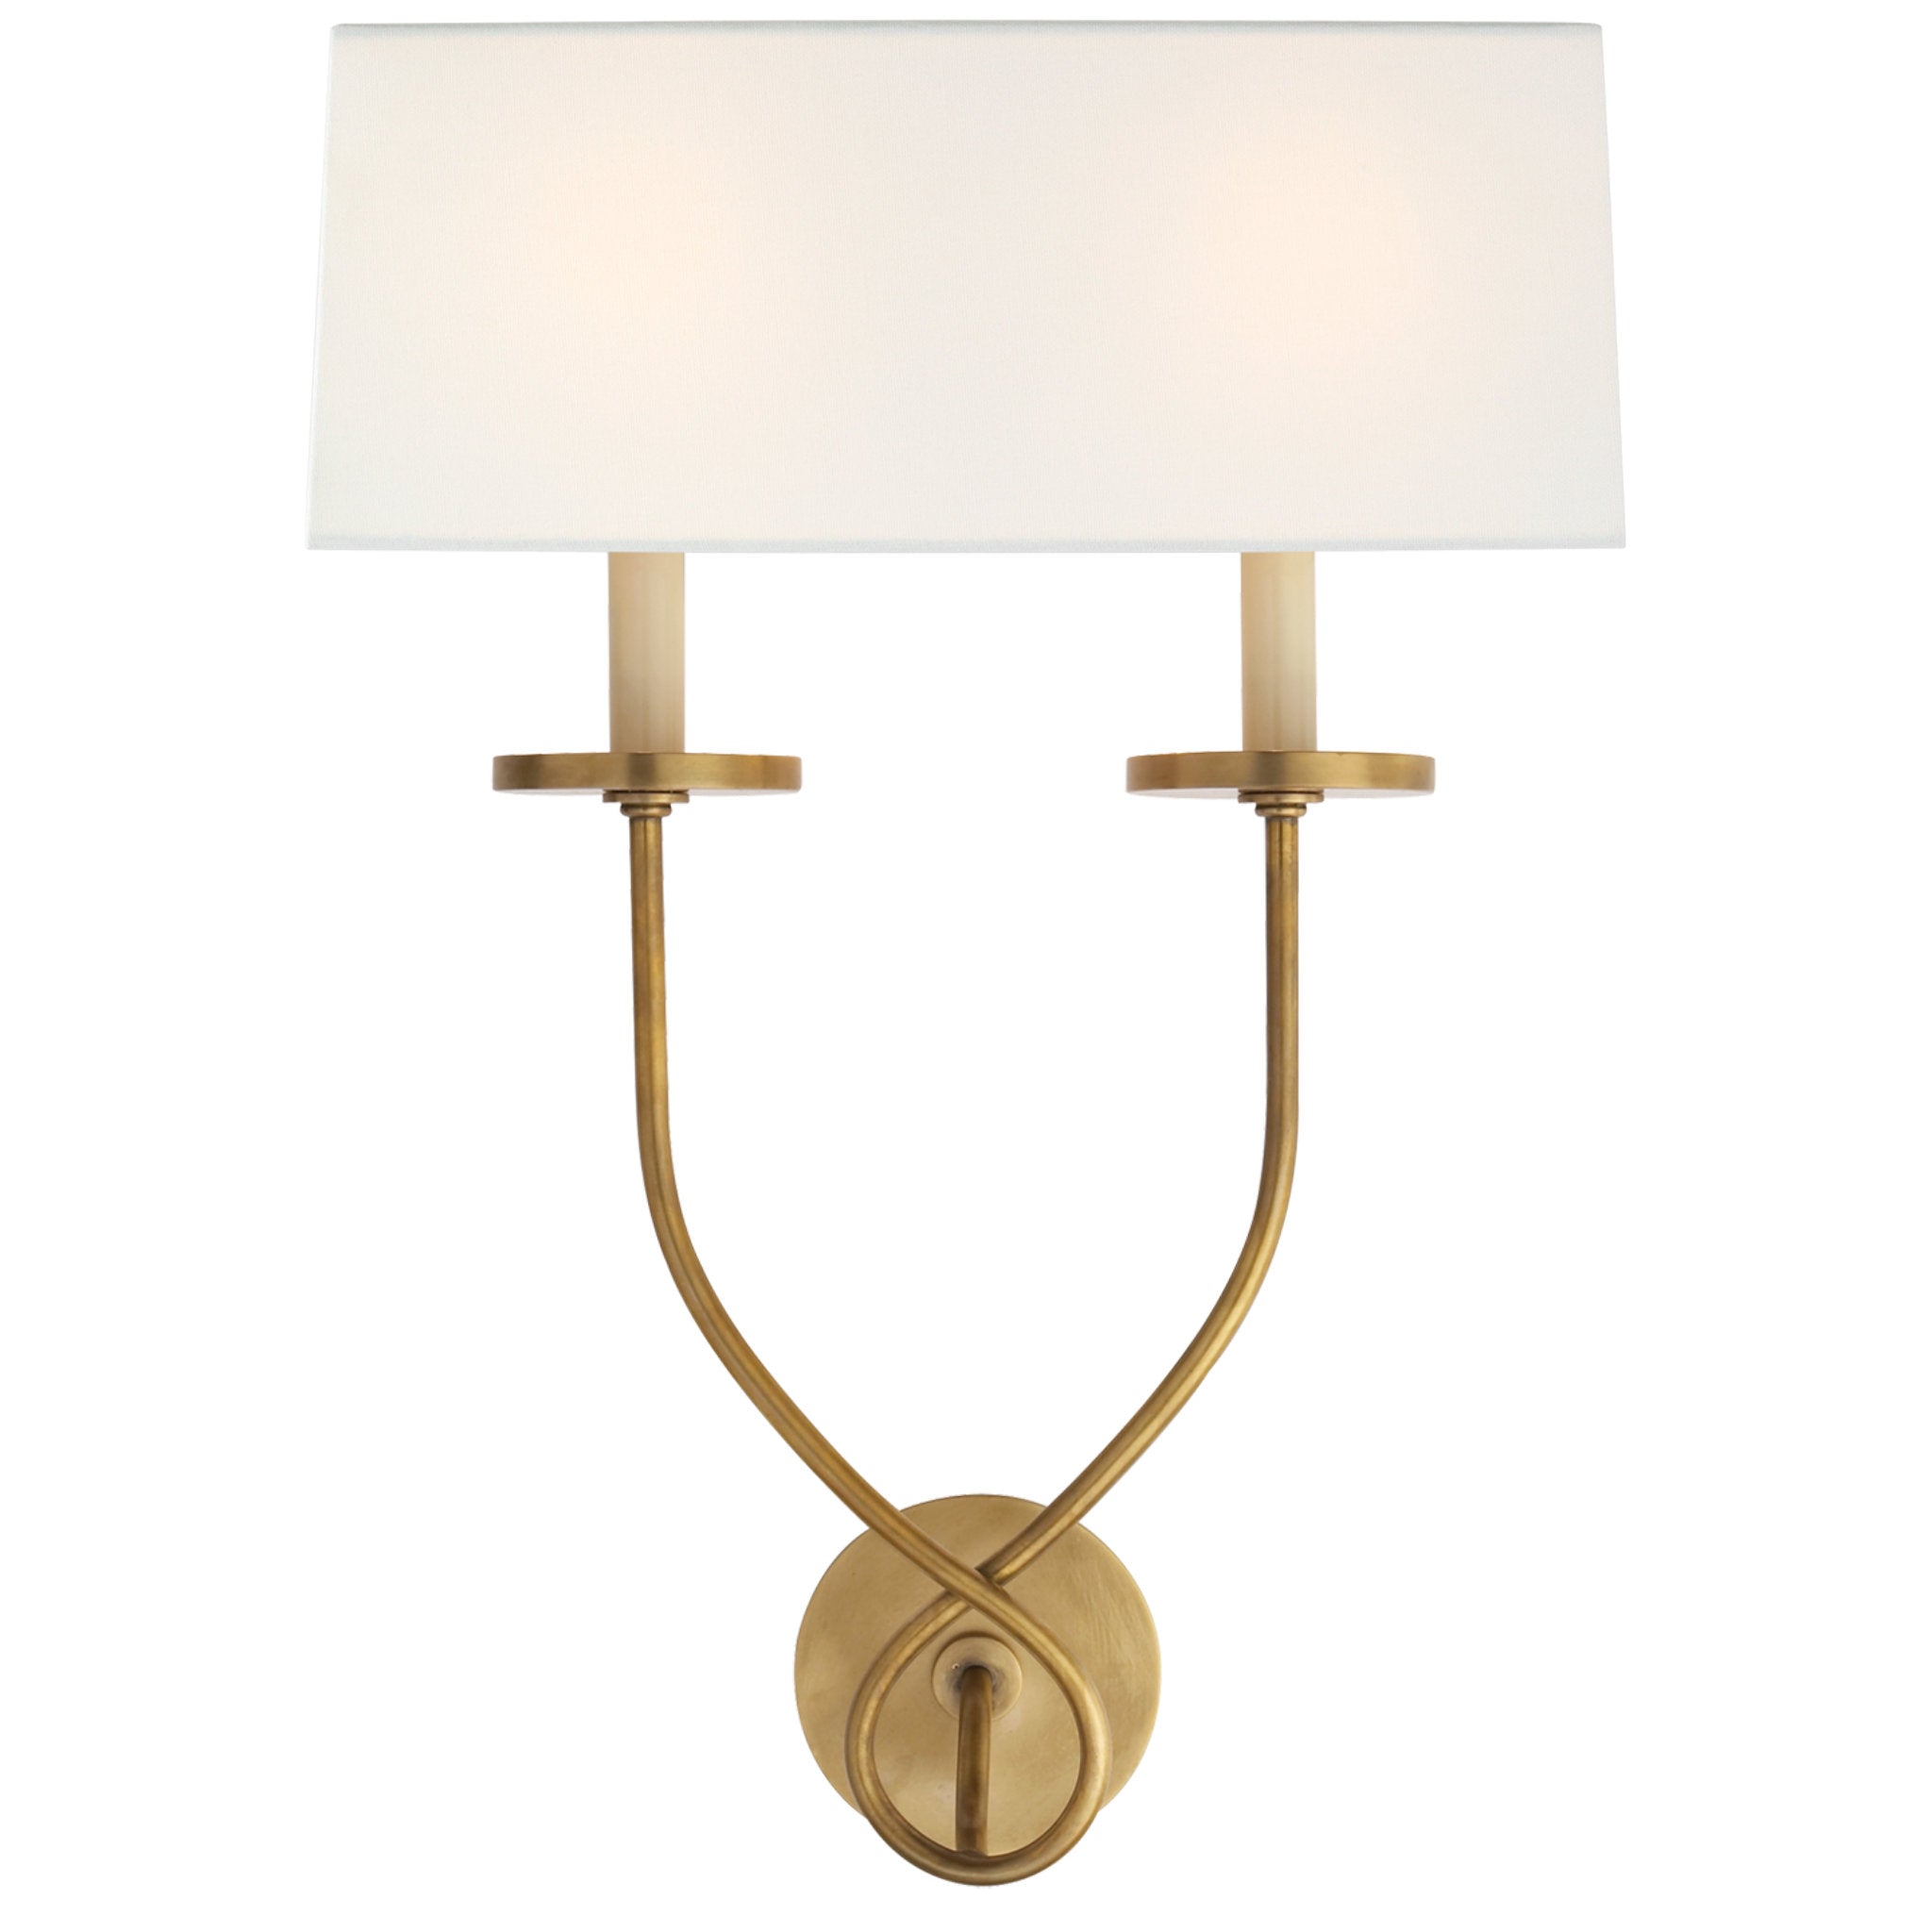 Chapman & Myers Symmetric Twist Double Sconce in Antique-Burnished Brass with Linen Shade